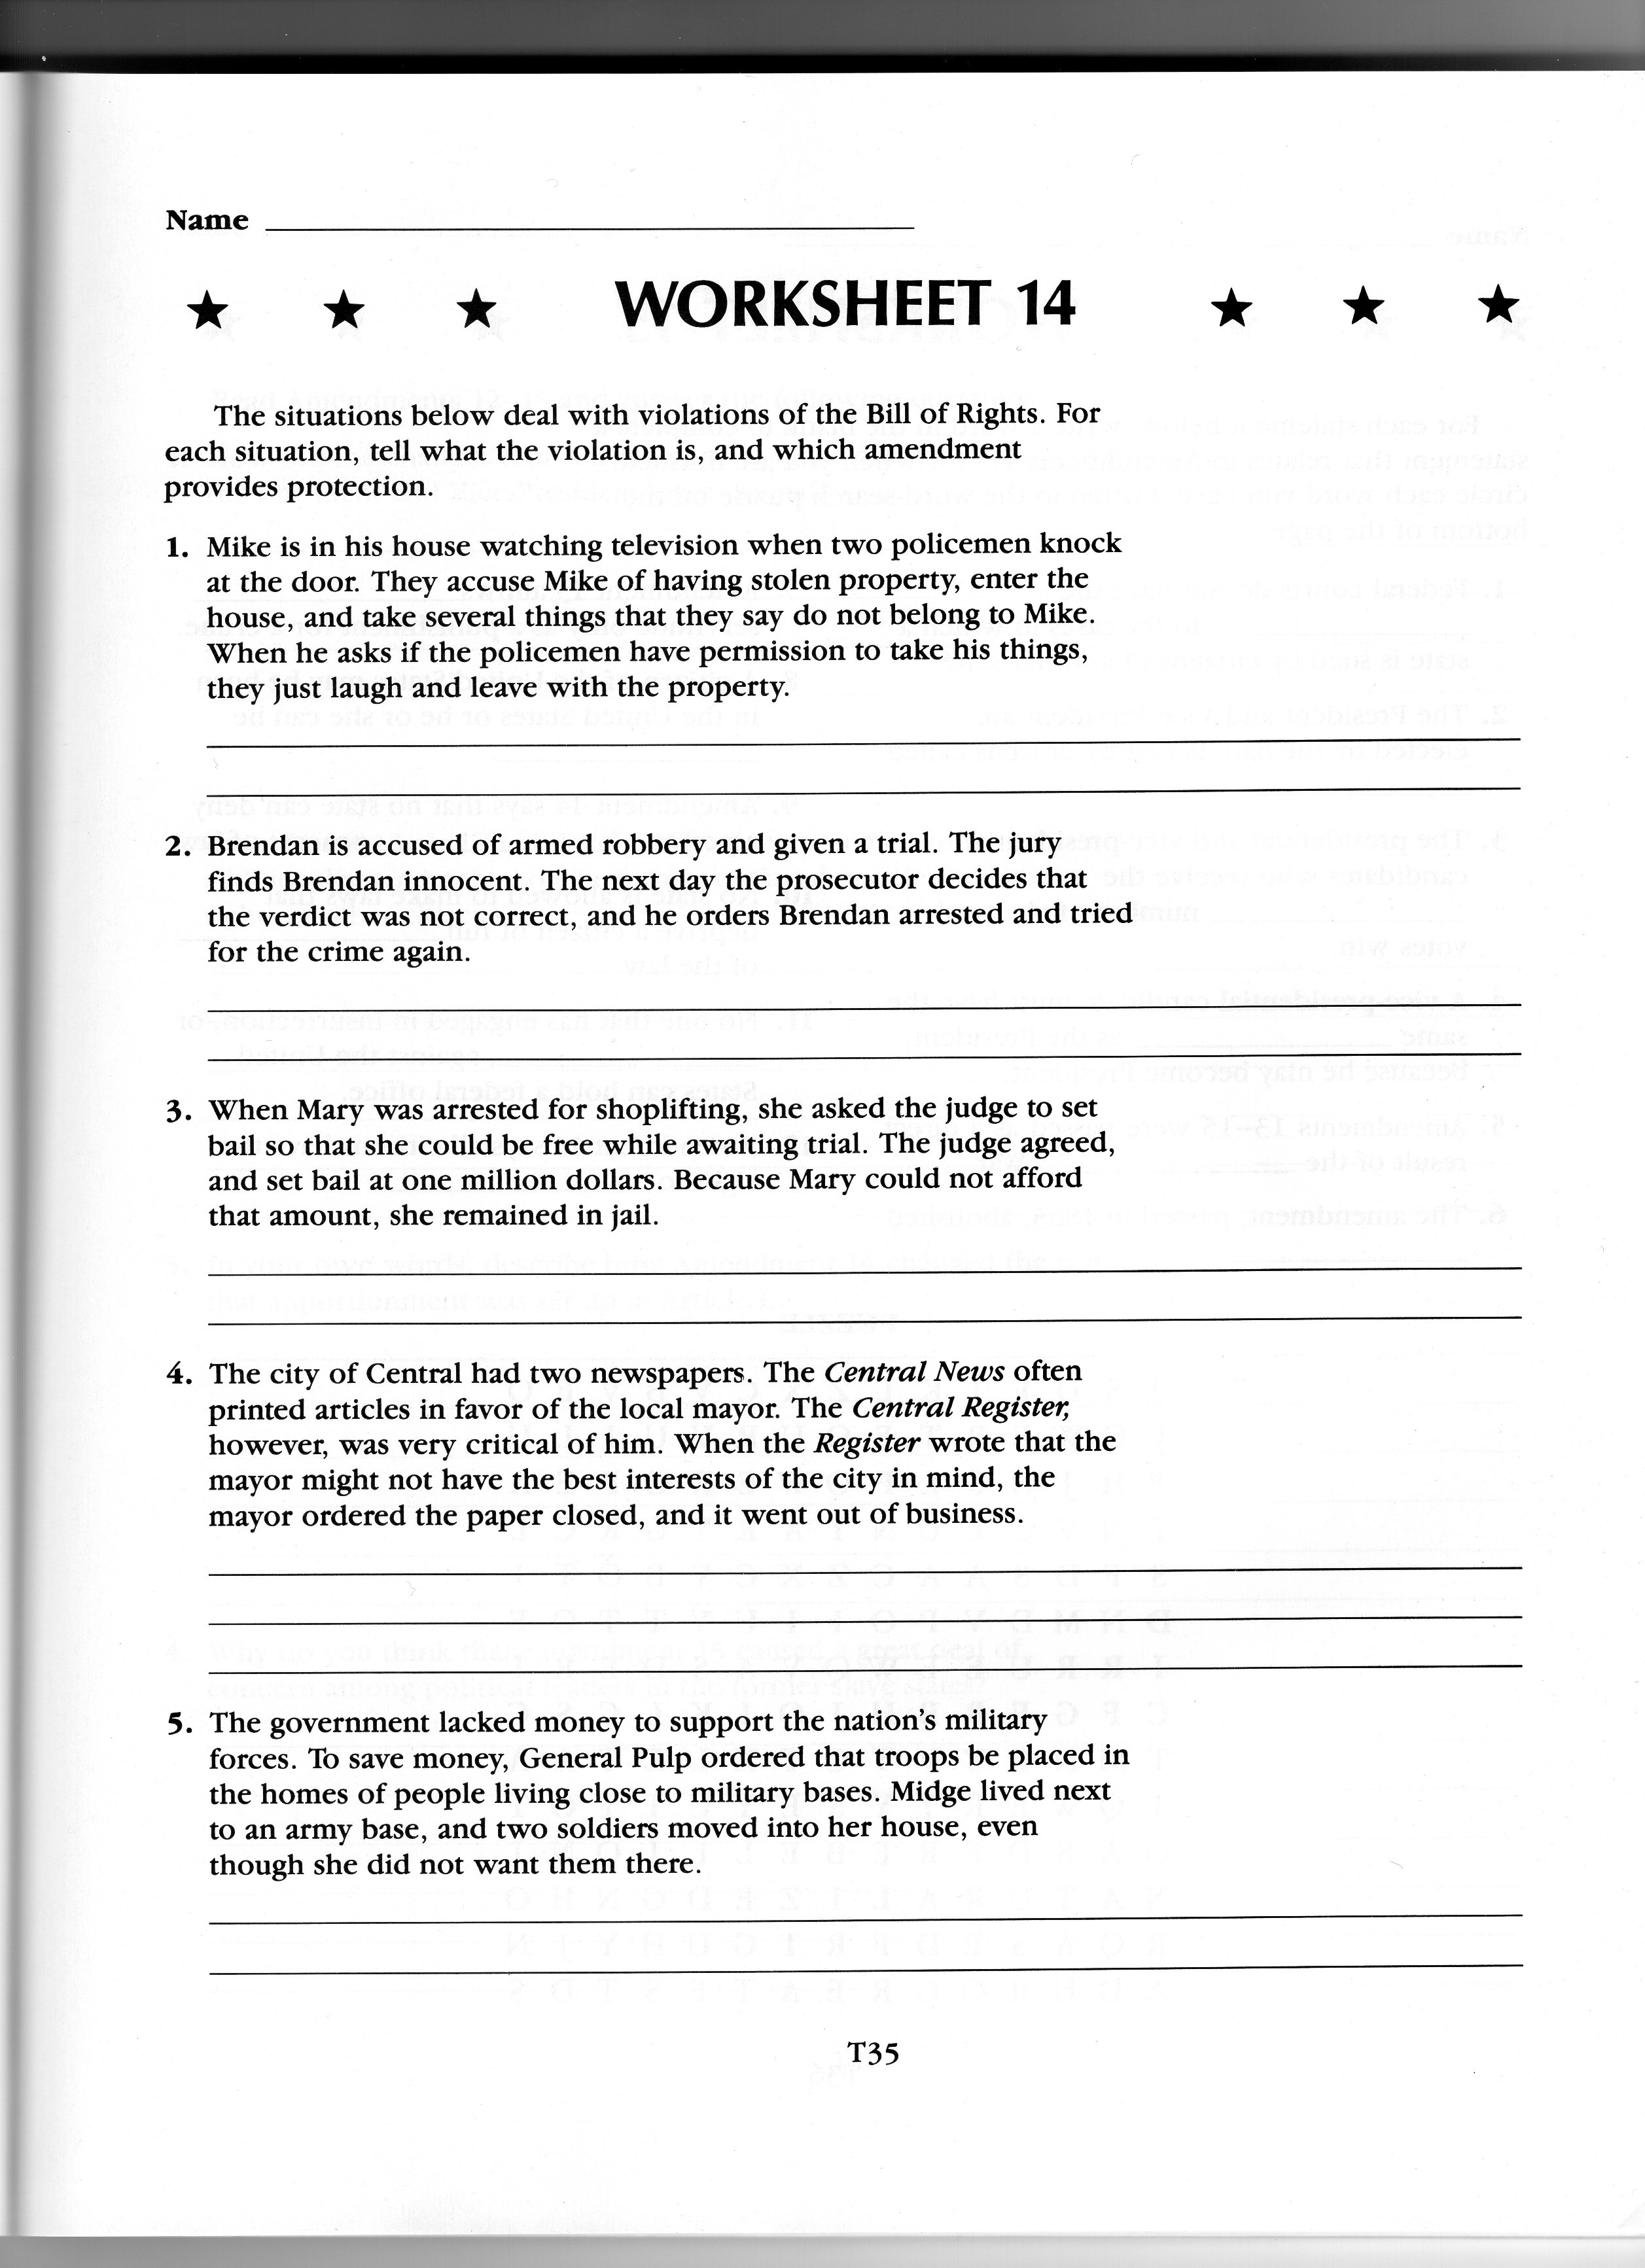 Foundations - Ms. Hawkins Social Studies For Bill Of Rights Worksheet Answers